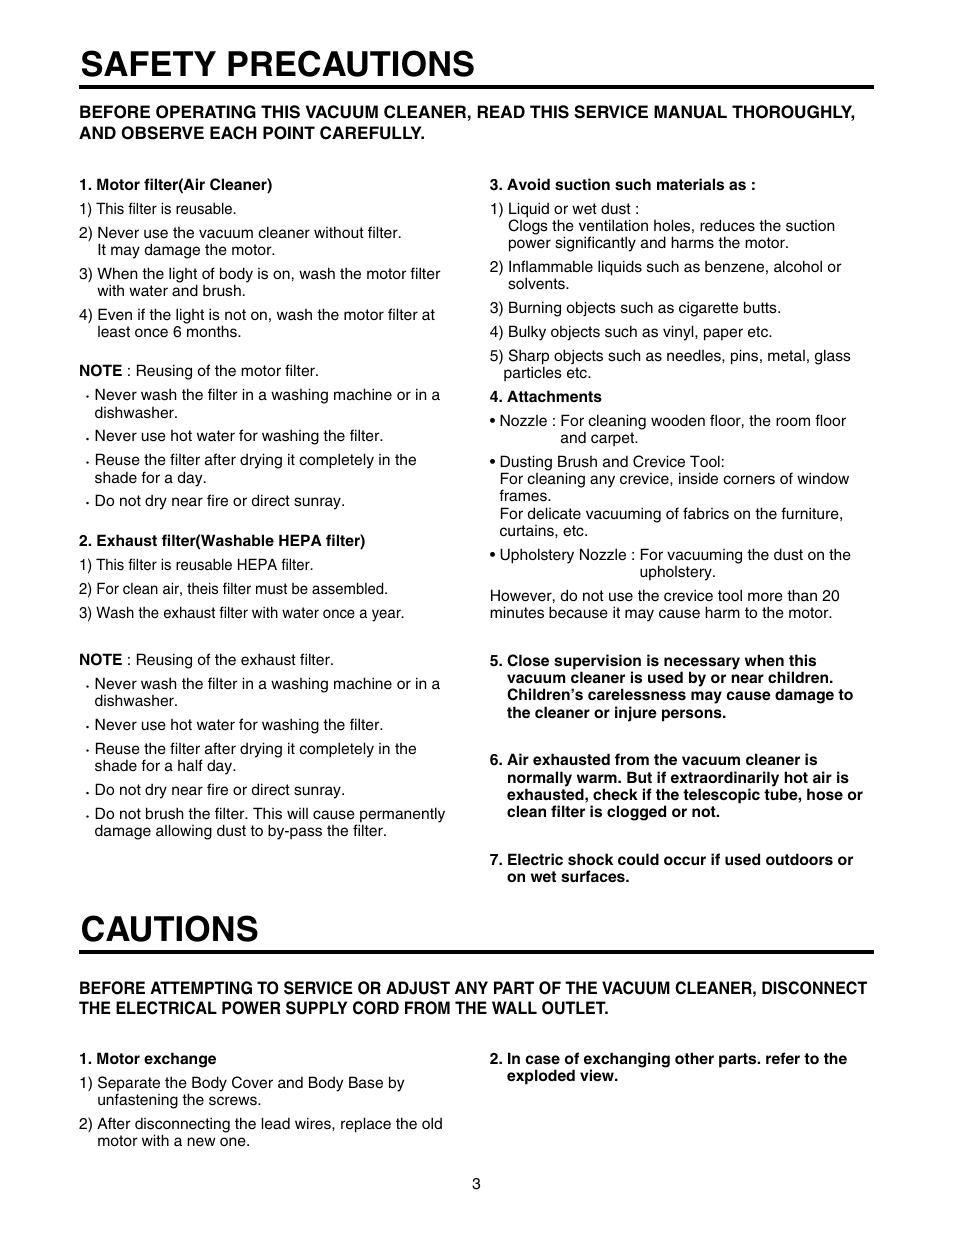 Safety precautions cautions | LG V-C7050HT User Manual | Page 3 / 23